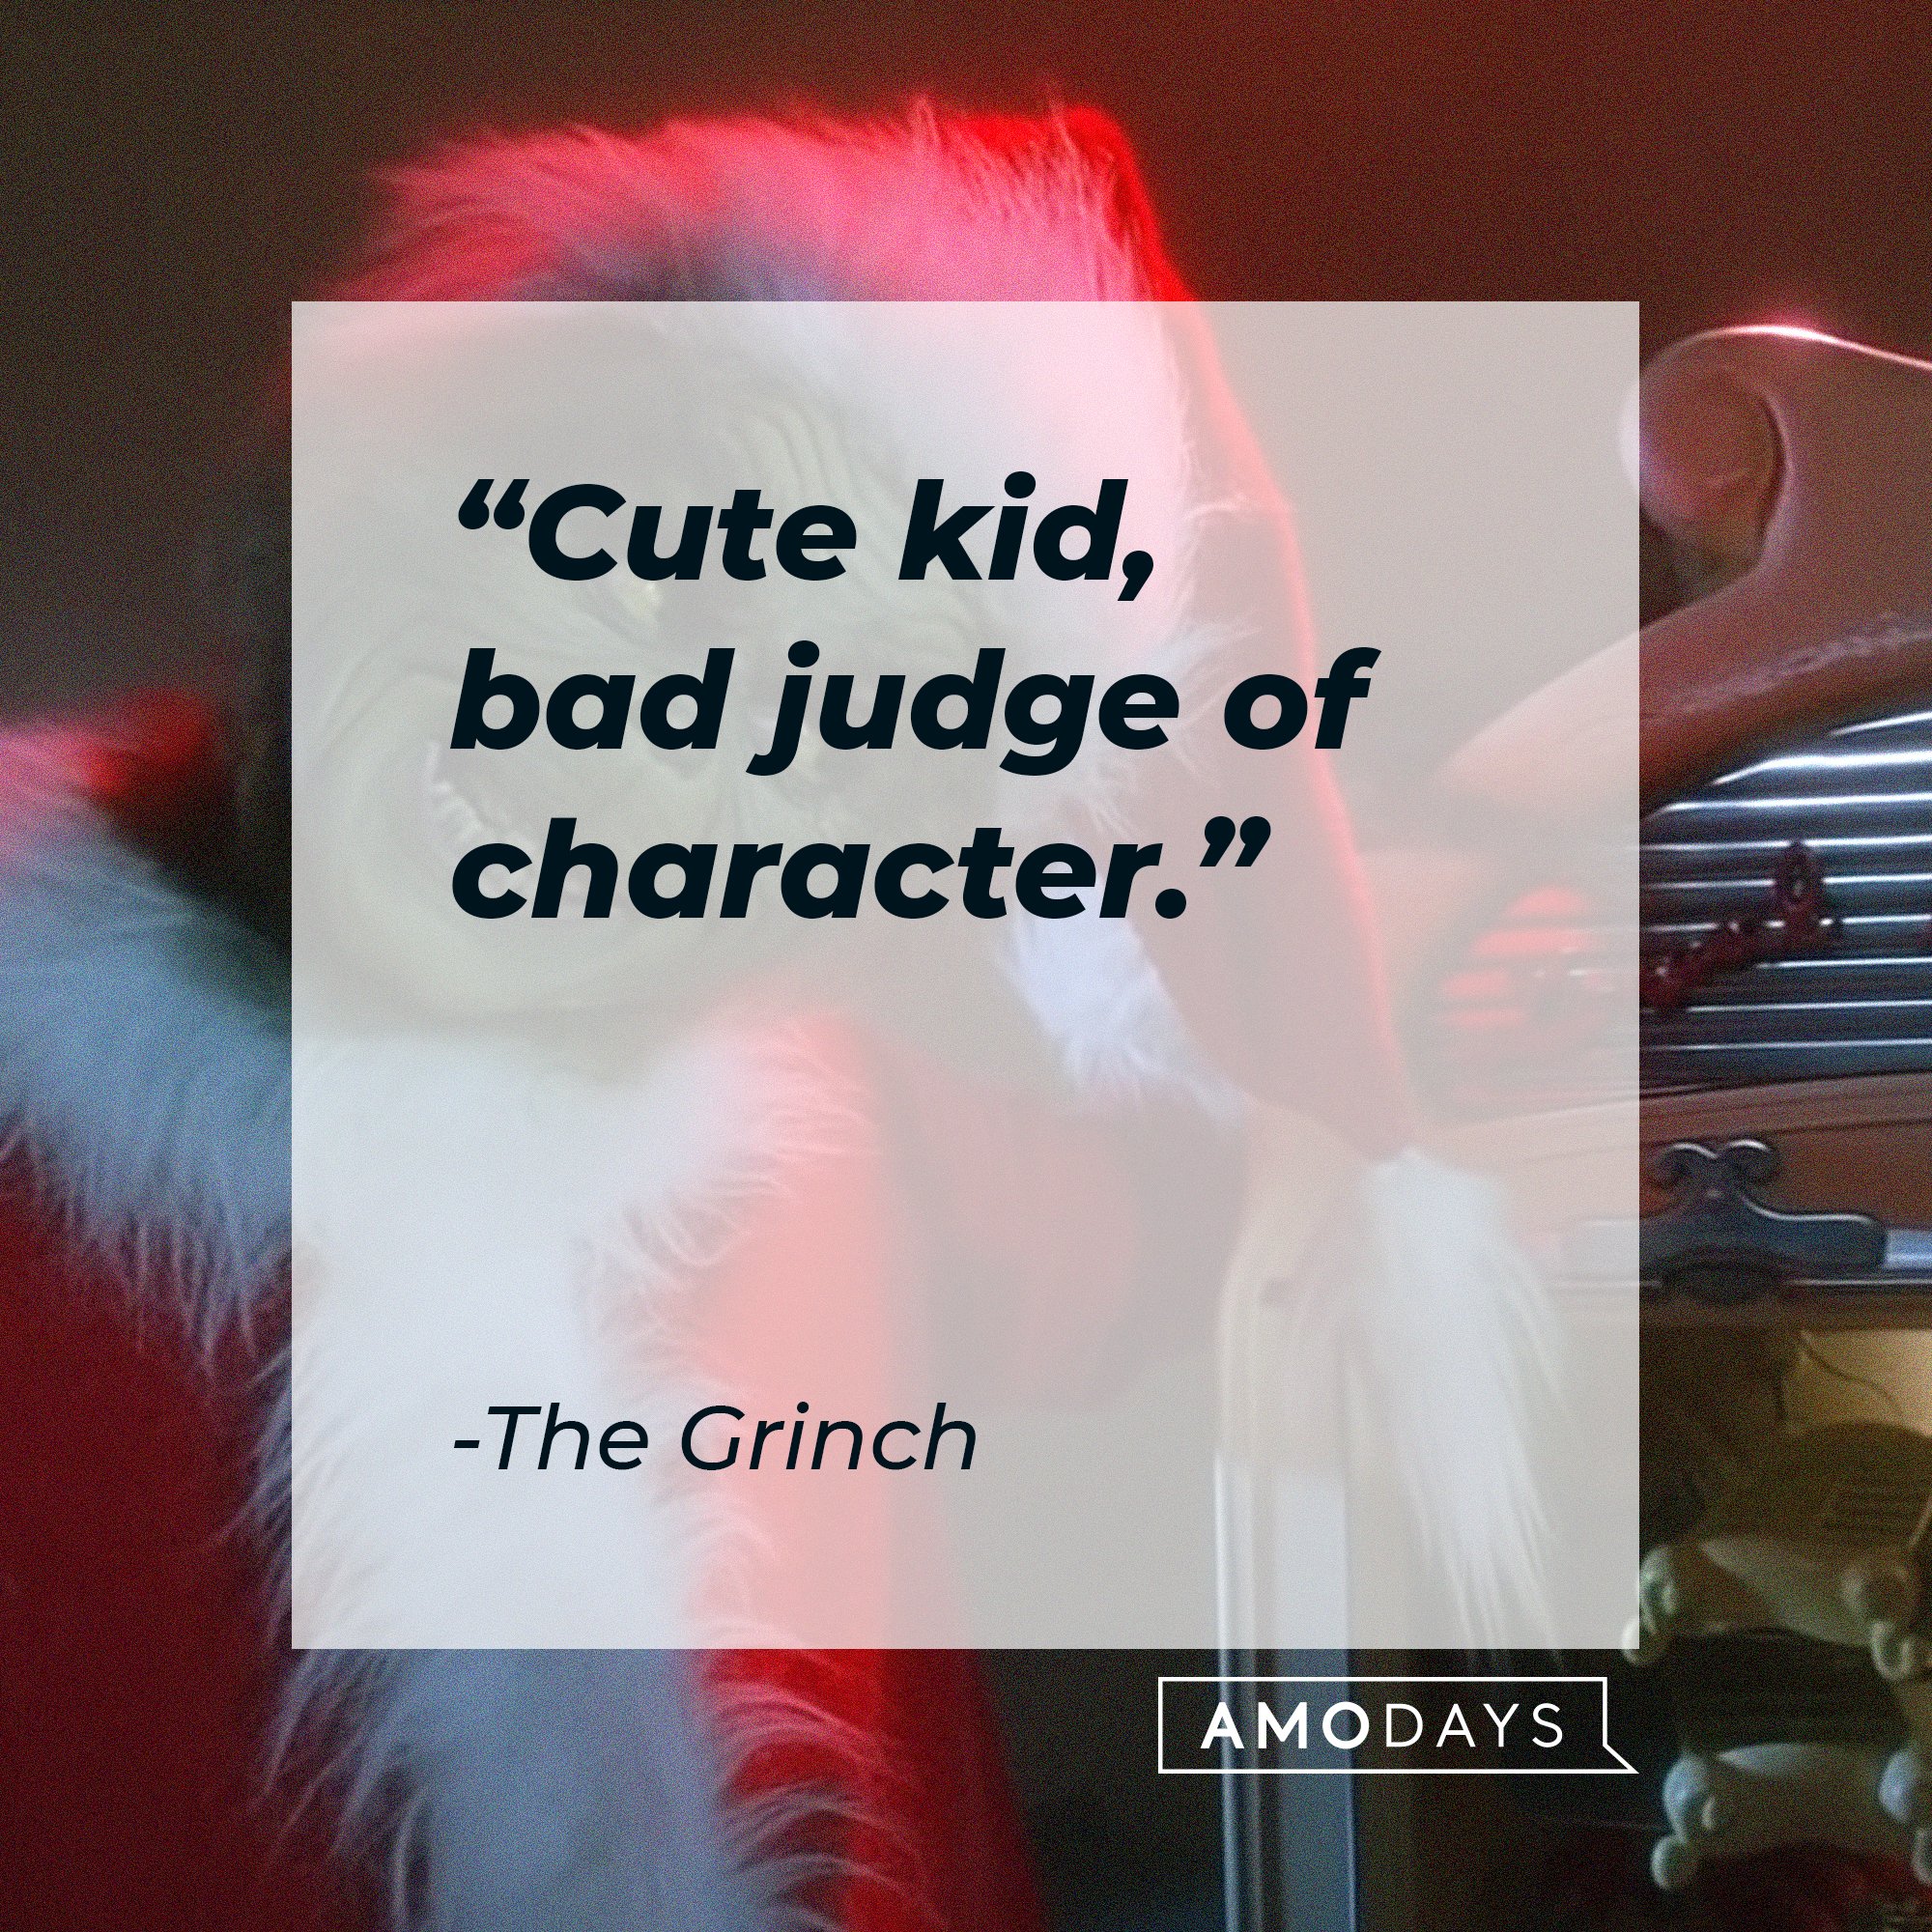 The Grinch's quote: "Cute kid, bad judge of character." | Image: AmoDays